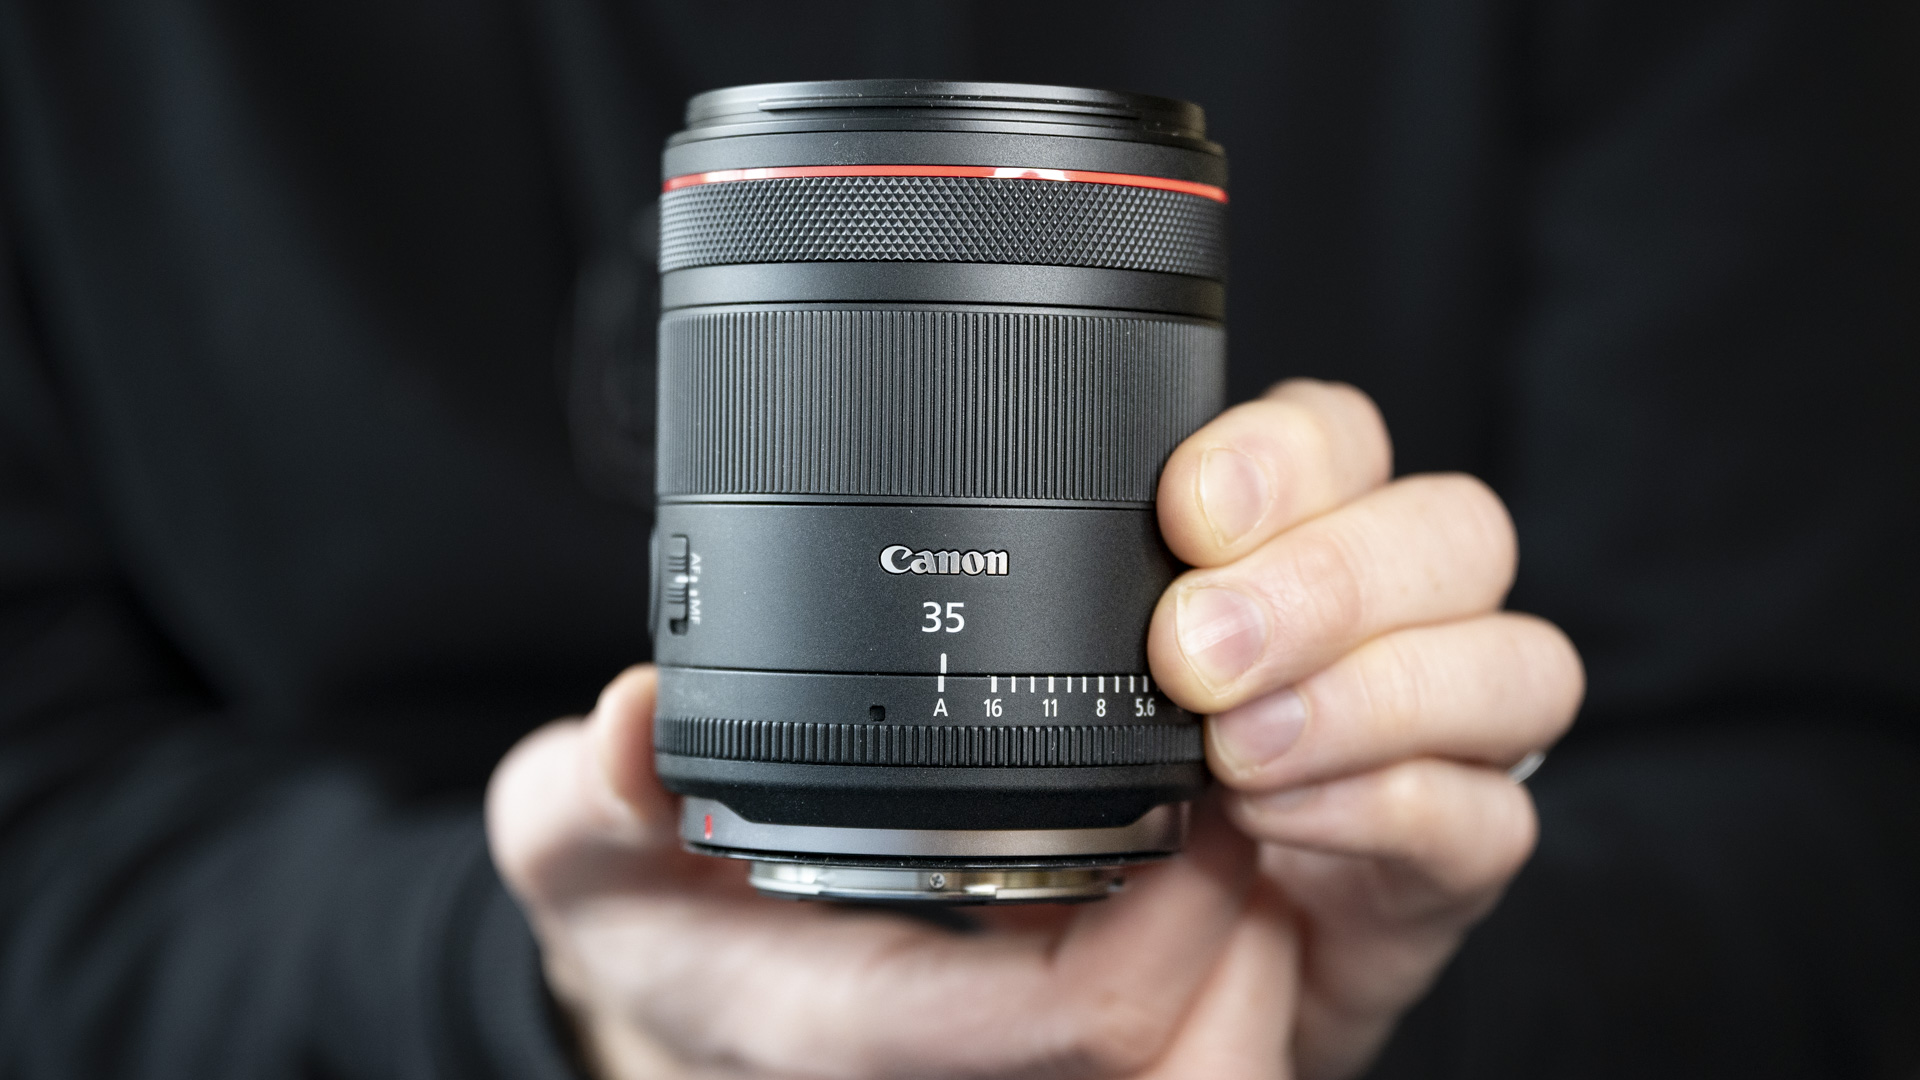 The Canon RF 35mm F1.4 lens in the hand